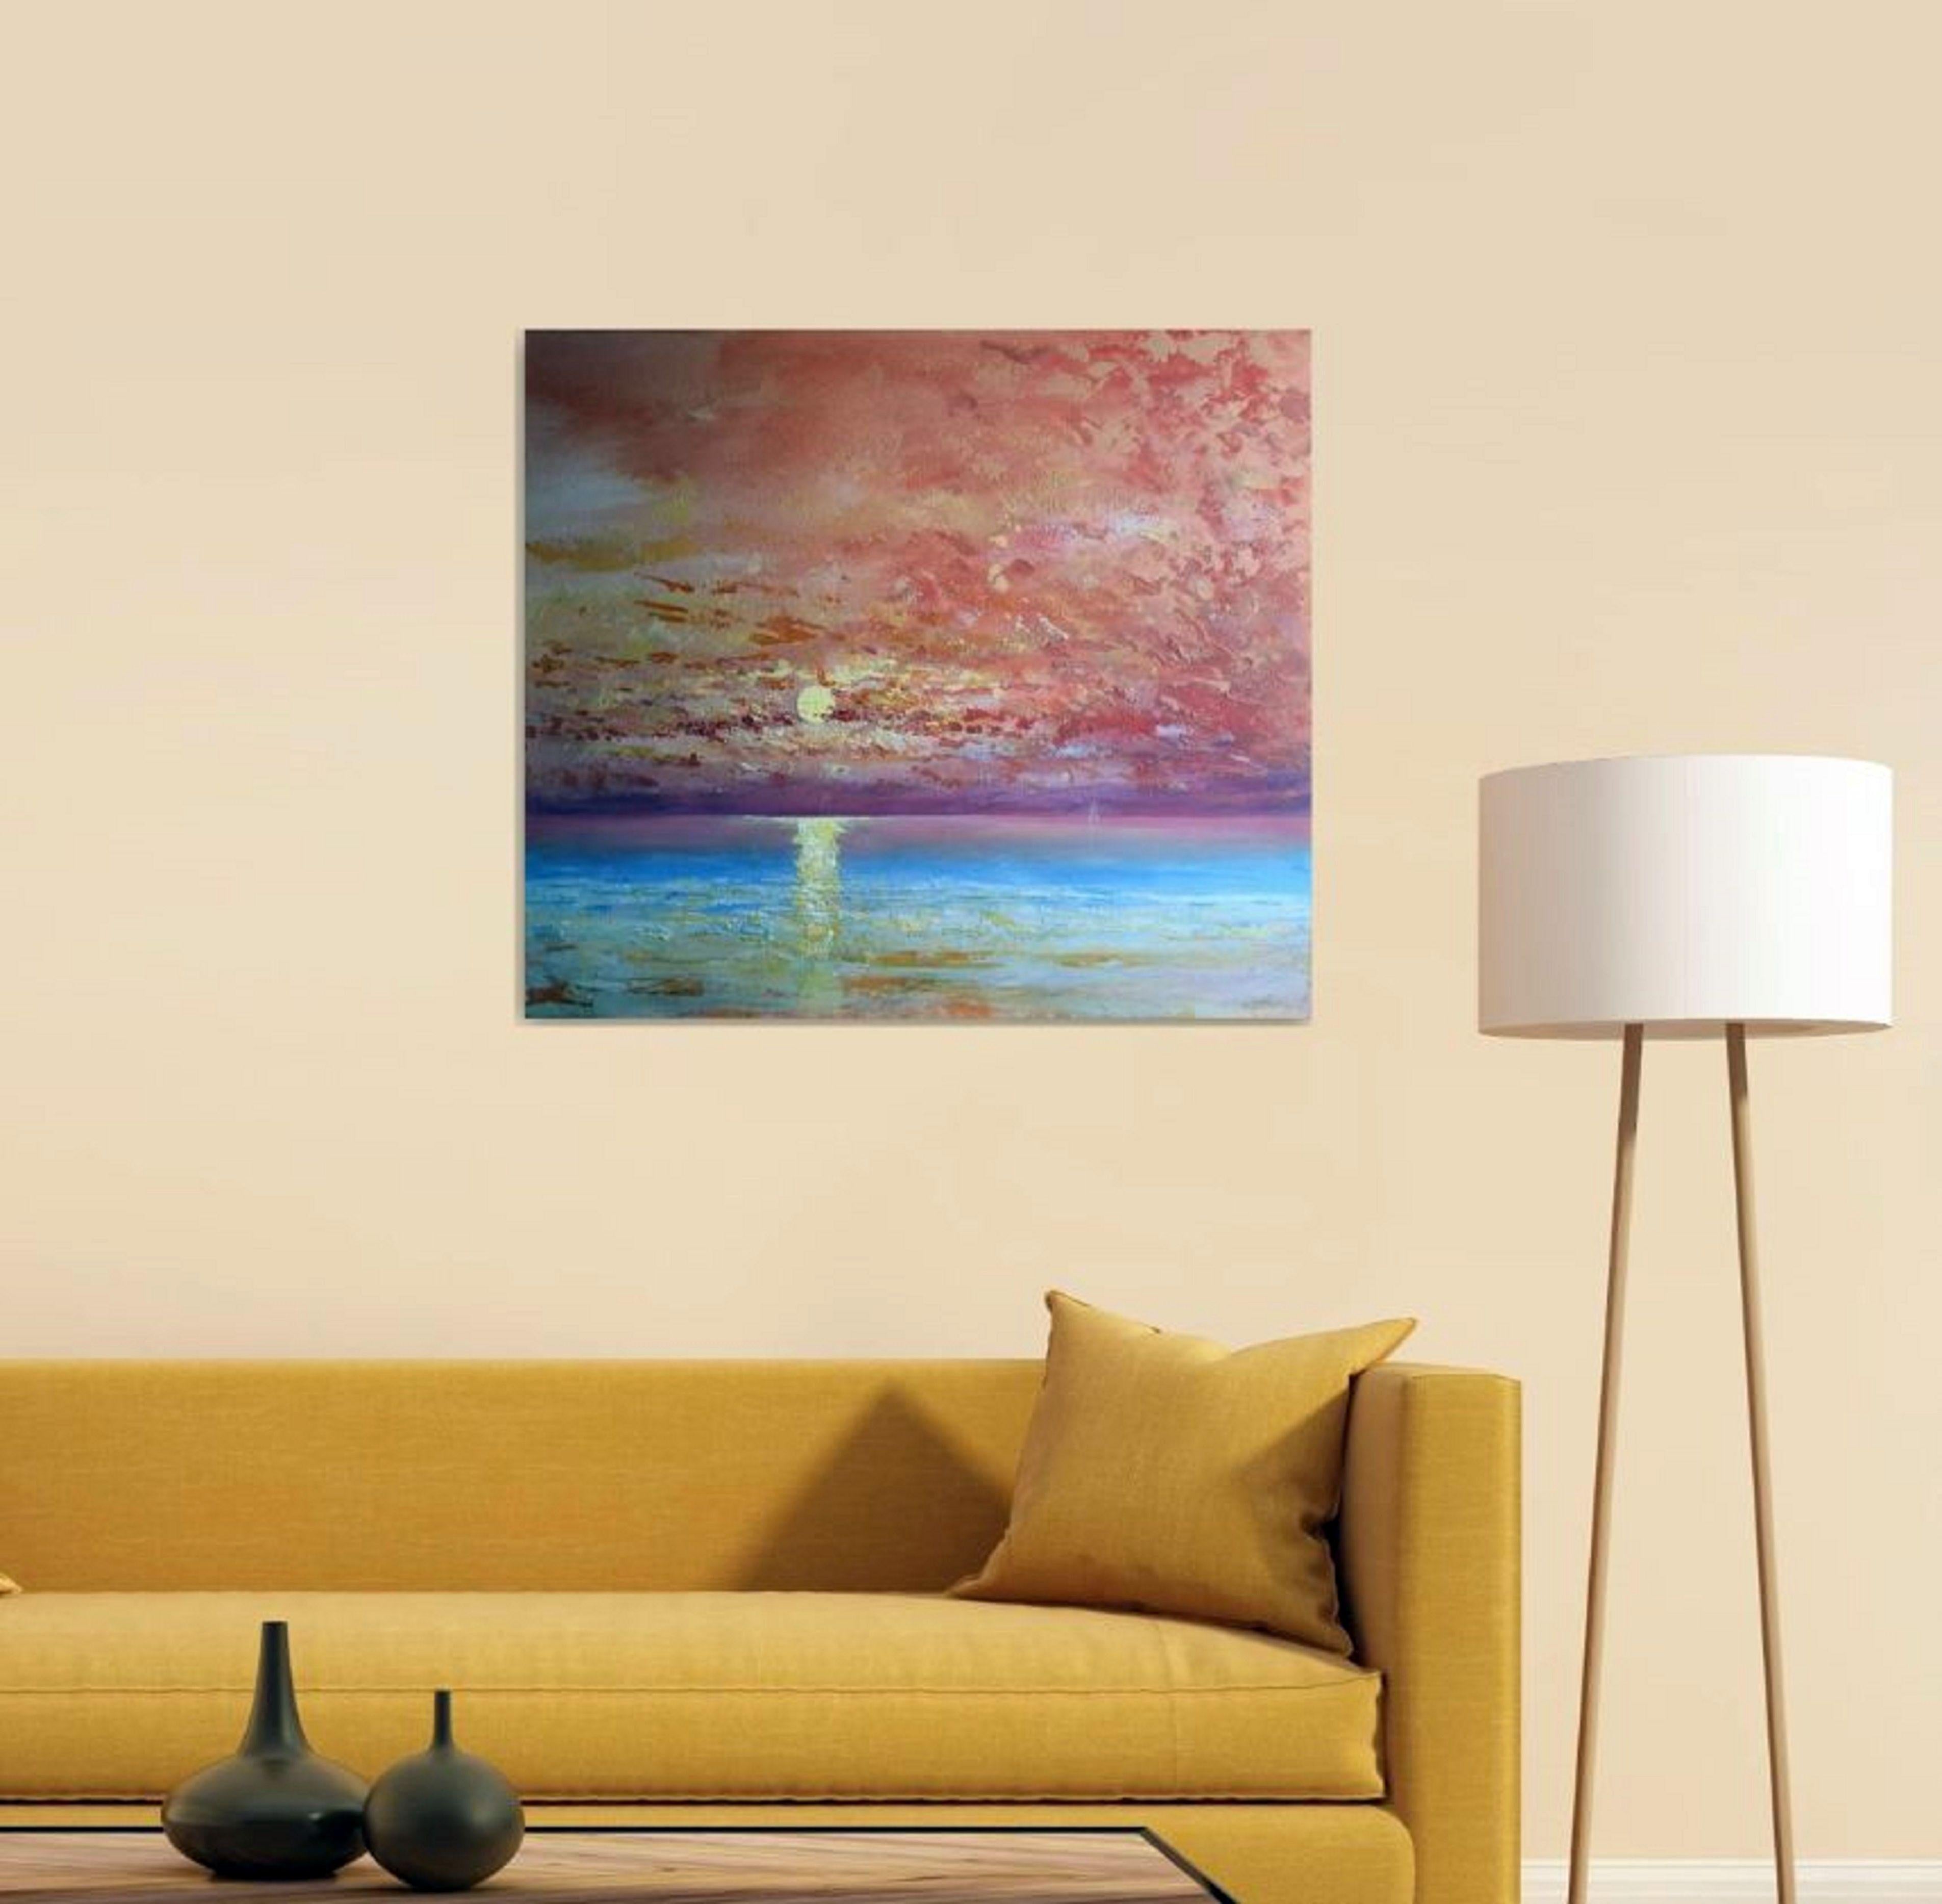 In this artwork, I intertwined the fervor of expressionism with the delicate touch of impressionism, using acrylic and oil to capture the sublime interplay of light and texture. The horizon beckons with a blend of fiery skies and tranquil waters,